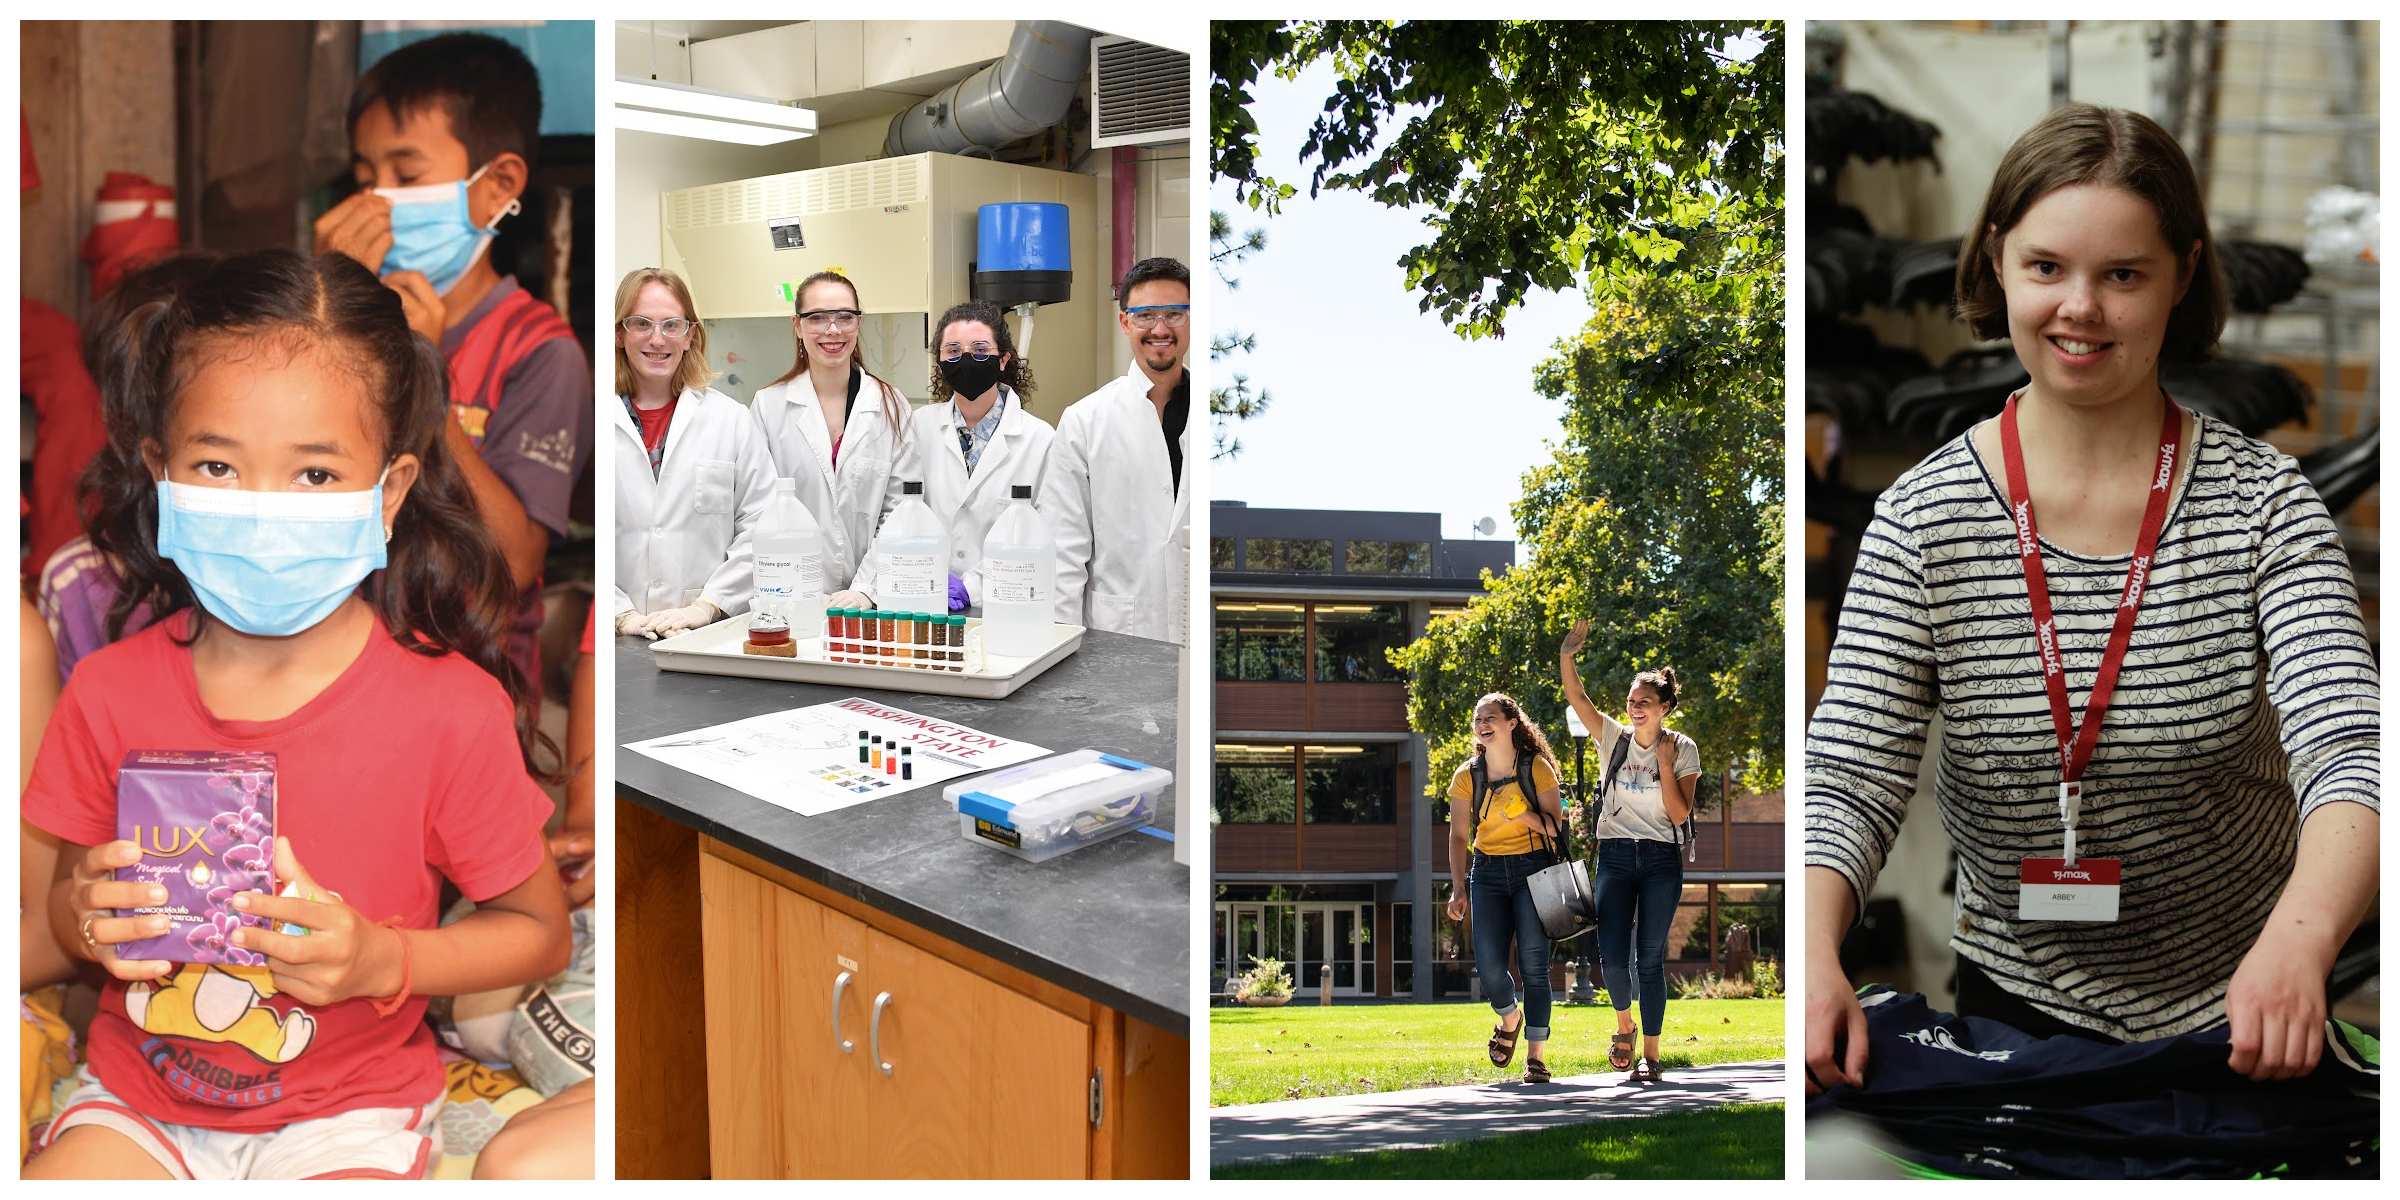 Image 1: a young child wearing a mask holds a small purple box. Image 2: four scientists wearing white lab coats smile for the camera inside a lab. Image 3: two female college students wave to someone while walking across campus. Image 4: a young woman wearing a striped shirt smiles for the camera while folding a shirt.  